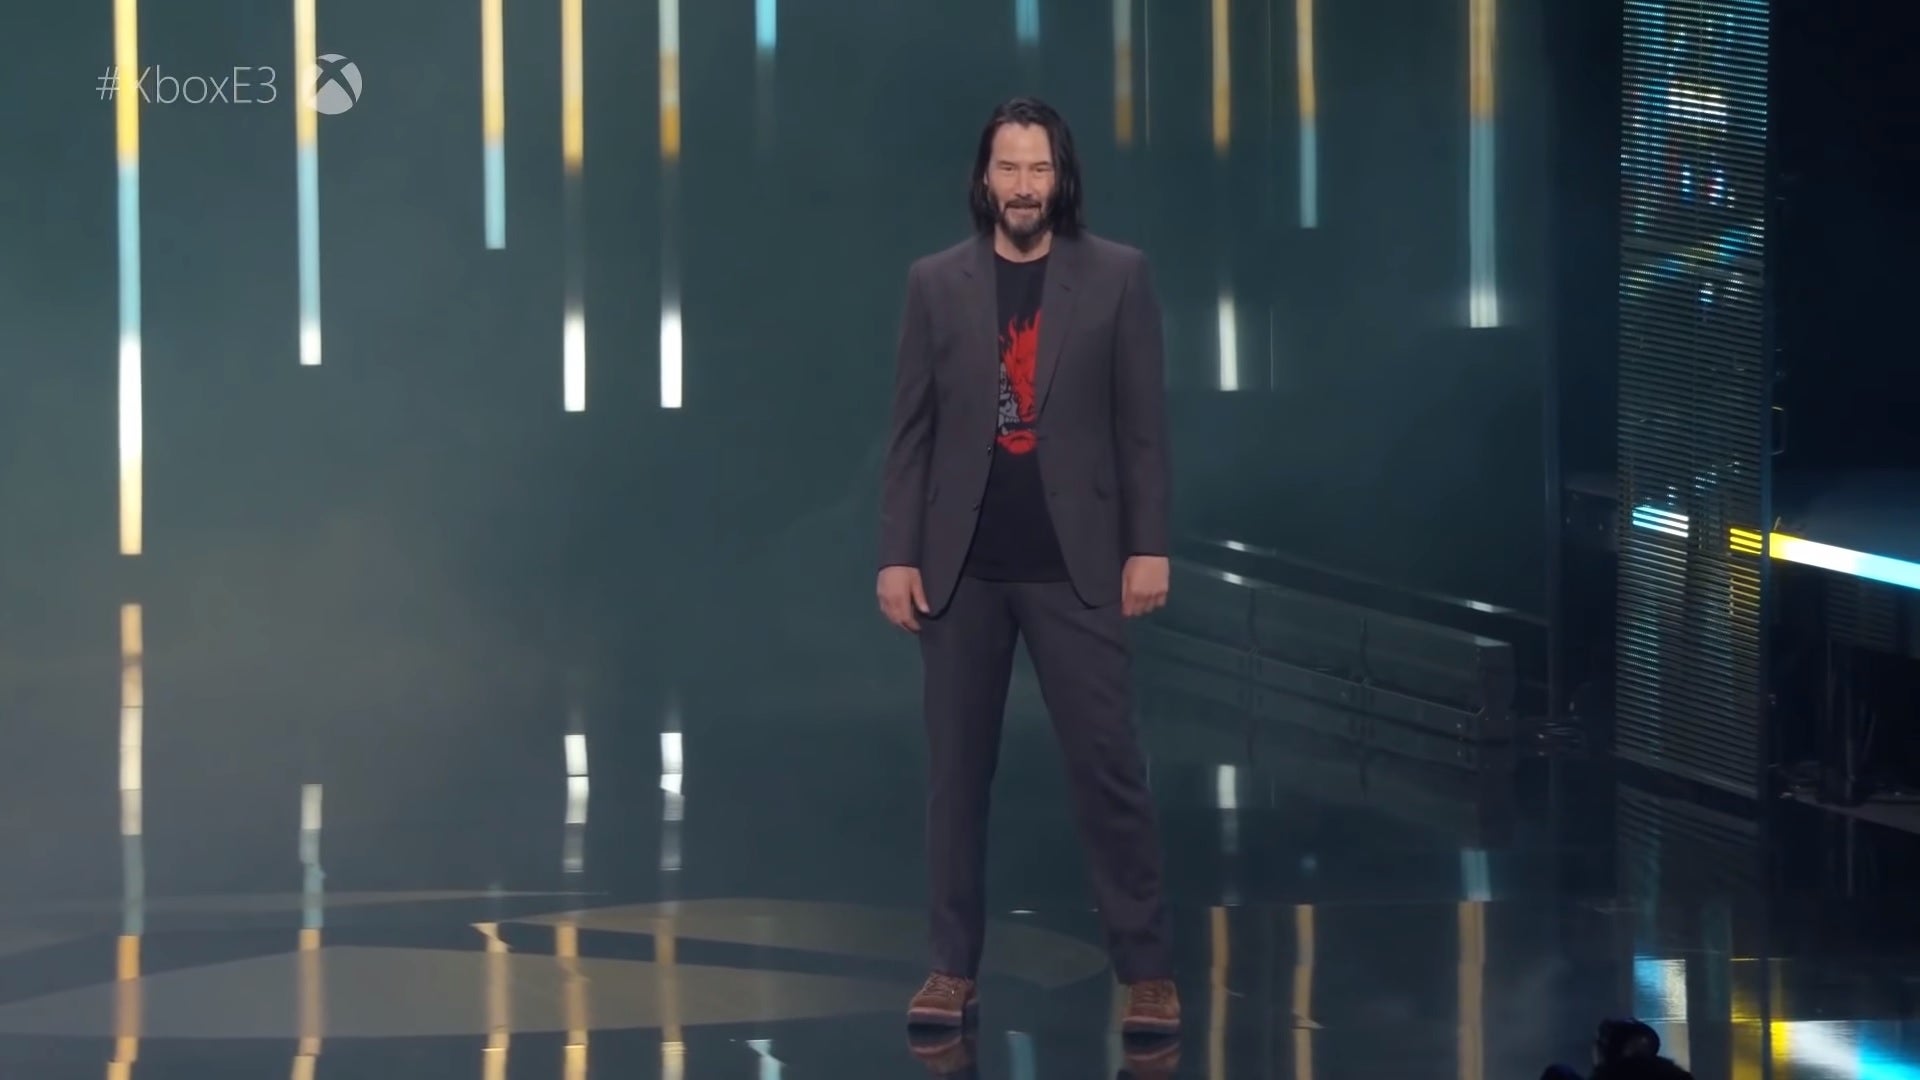 Image for Keanu Reeves says games don't need legitimizing